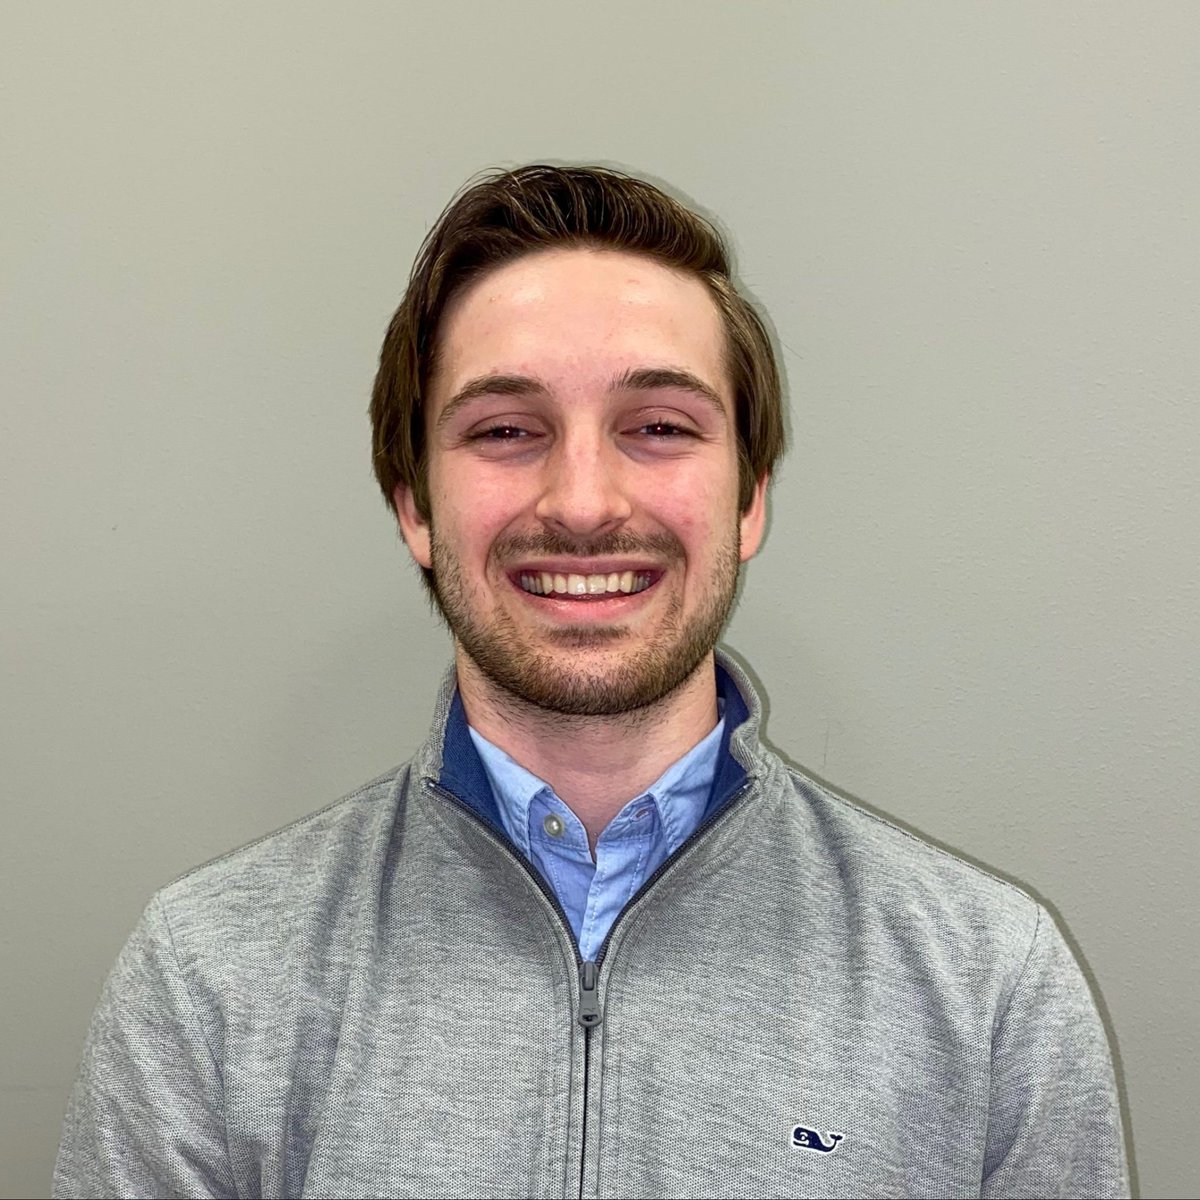 We would like to congratulate one of our former students, Parker Esswein for receiving the NSF Graduate Research Fellowships Program Award as he continues his education as a Graduate Research Assistant in the Gerecht Laboratory at Duke University! Congratulations, Parker!